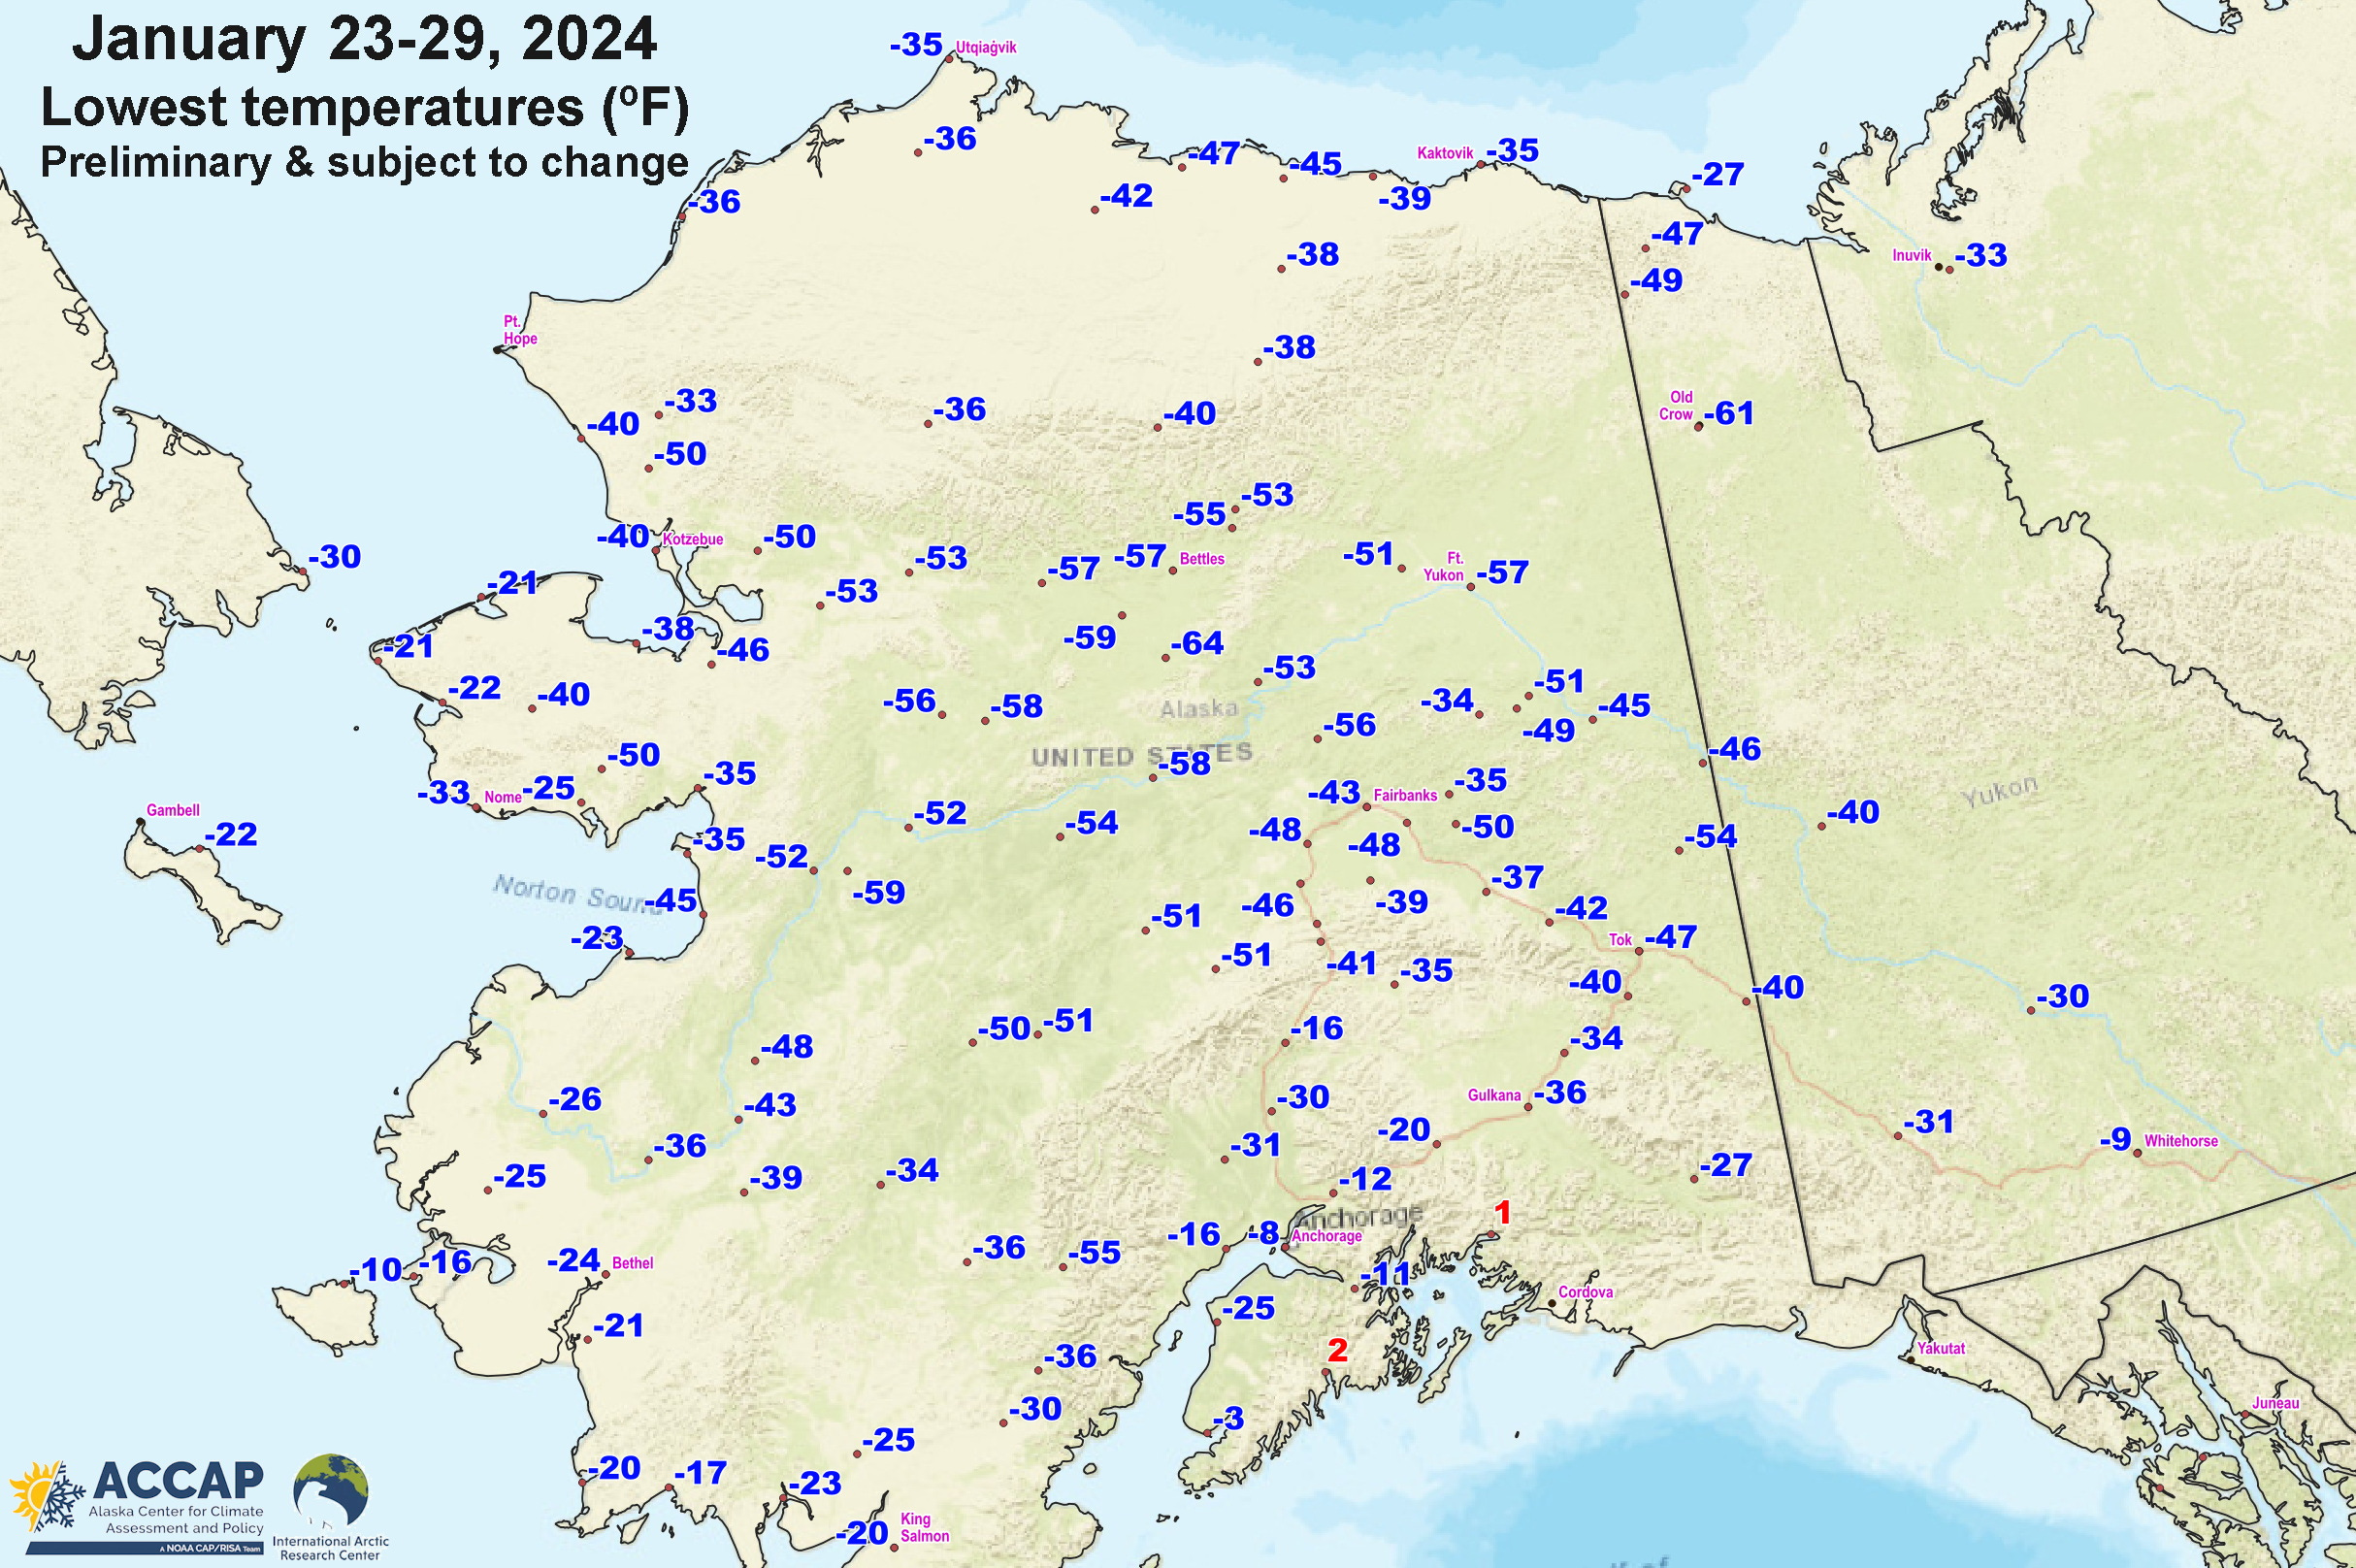 a map of Alaska with showing low temperatures for Jan. 23-29, 2024